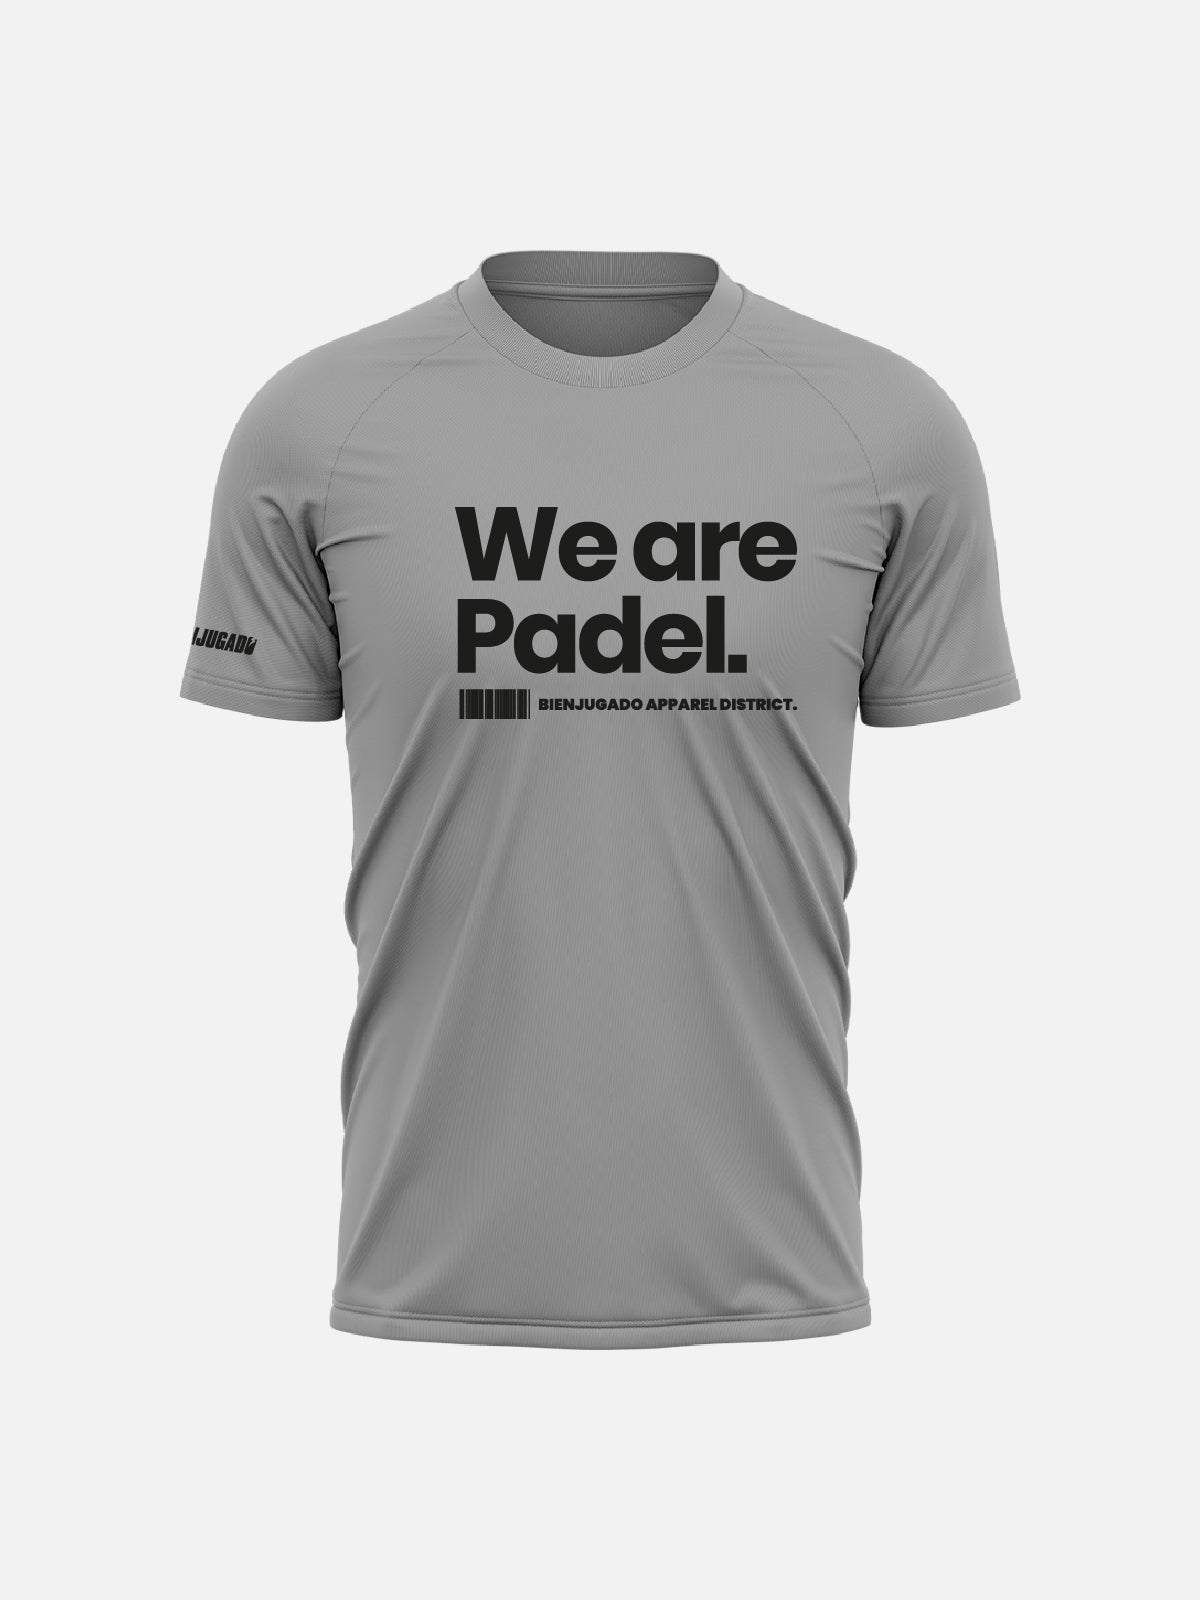 T-Shirt Fun Quick Dry - We Are Padel